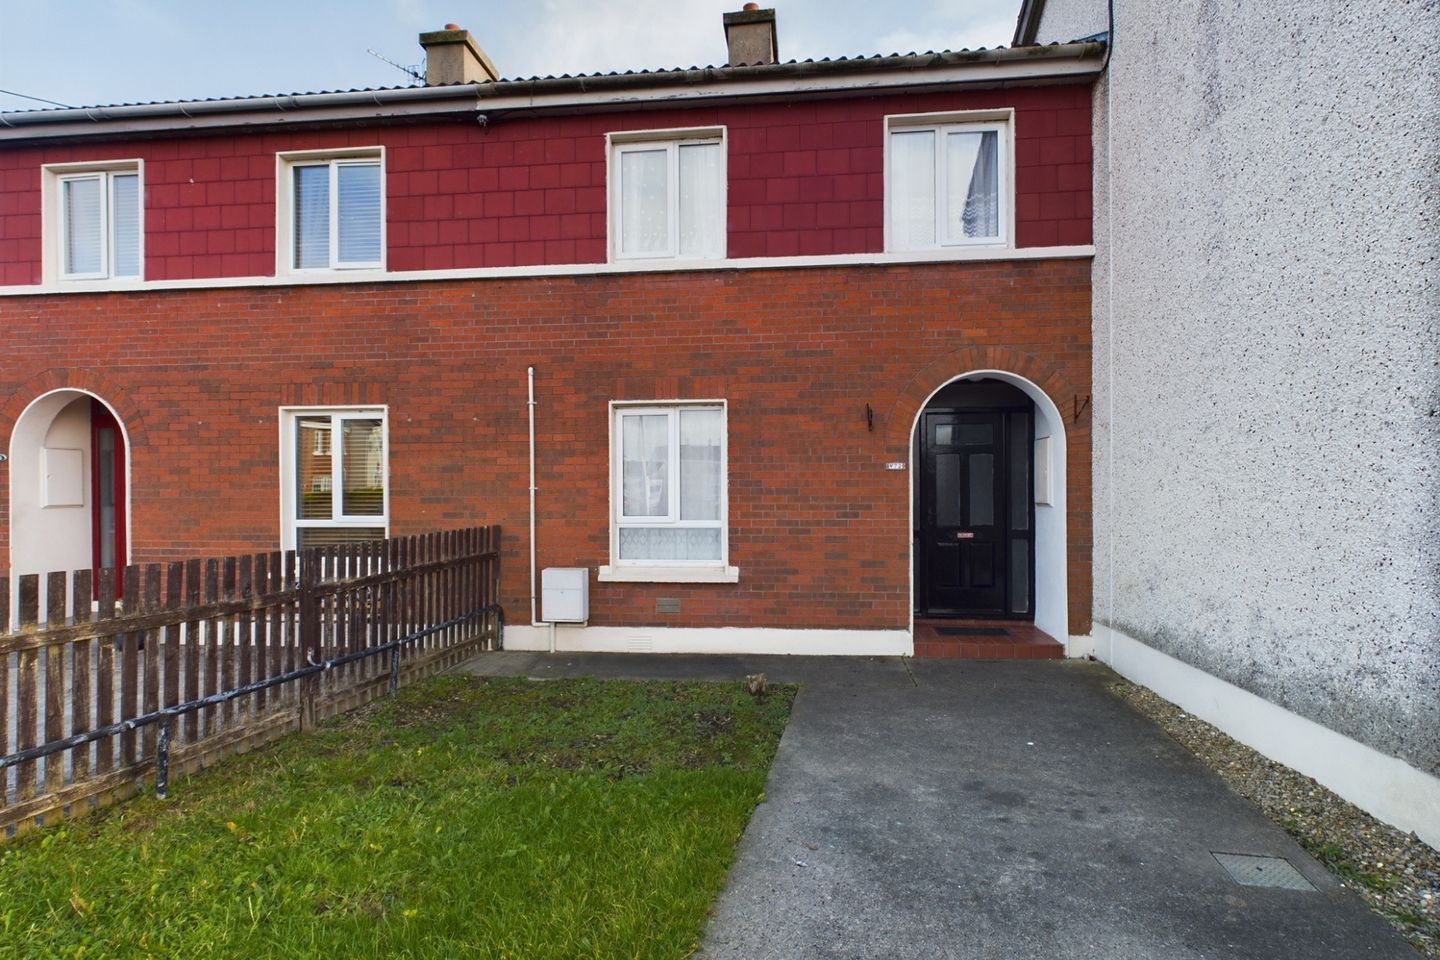 72 Saint Herblain Park, Kilcohan, Waterford, Waterford City, Co. Waterford, X91YD3C